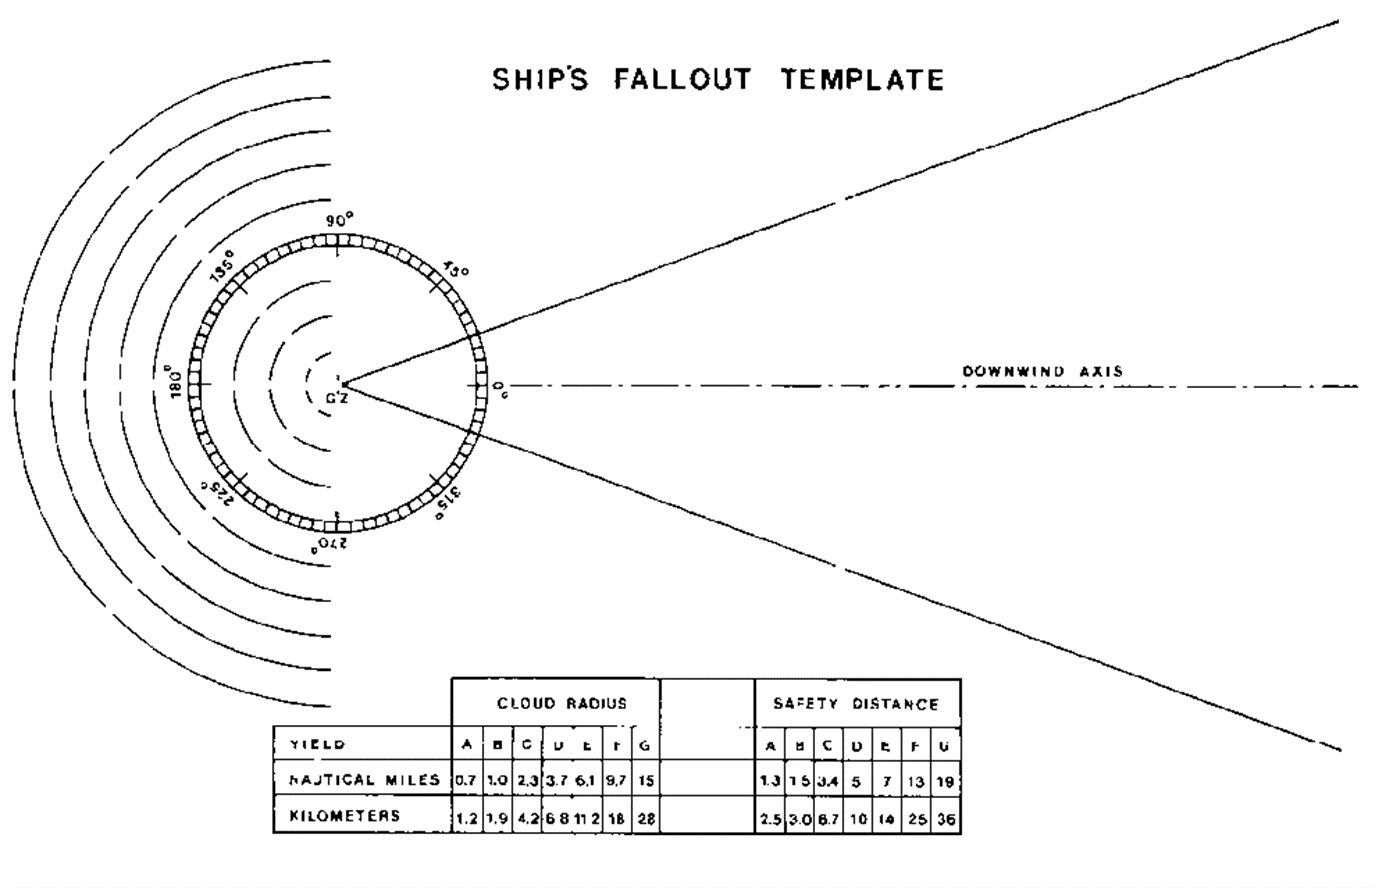 A graph showing a ship's fallout template, showing initial circular radius follow by an expanding cone representing downwind axis